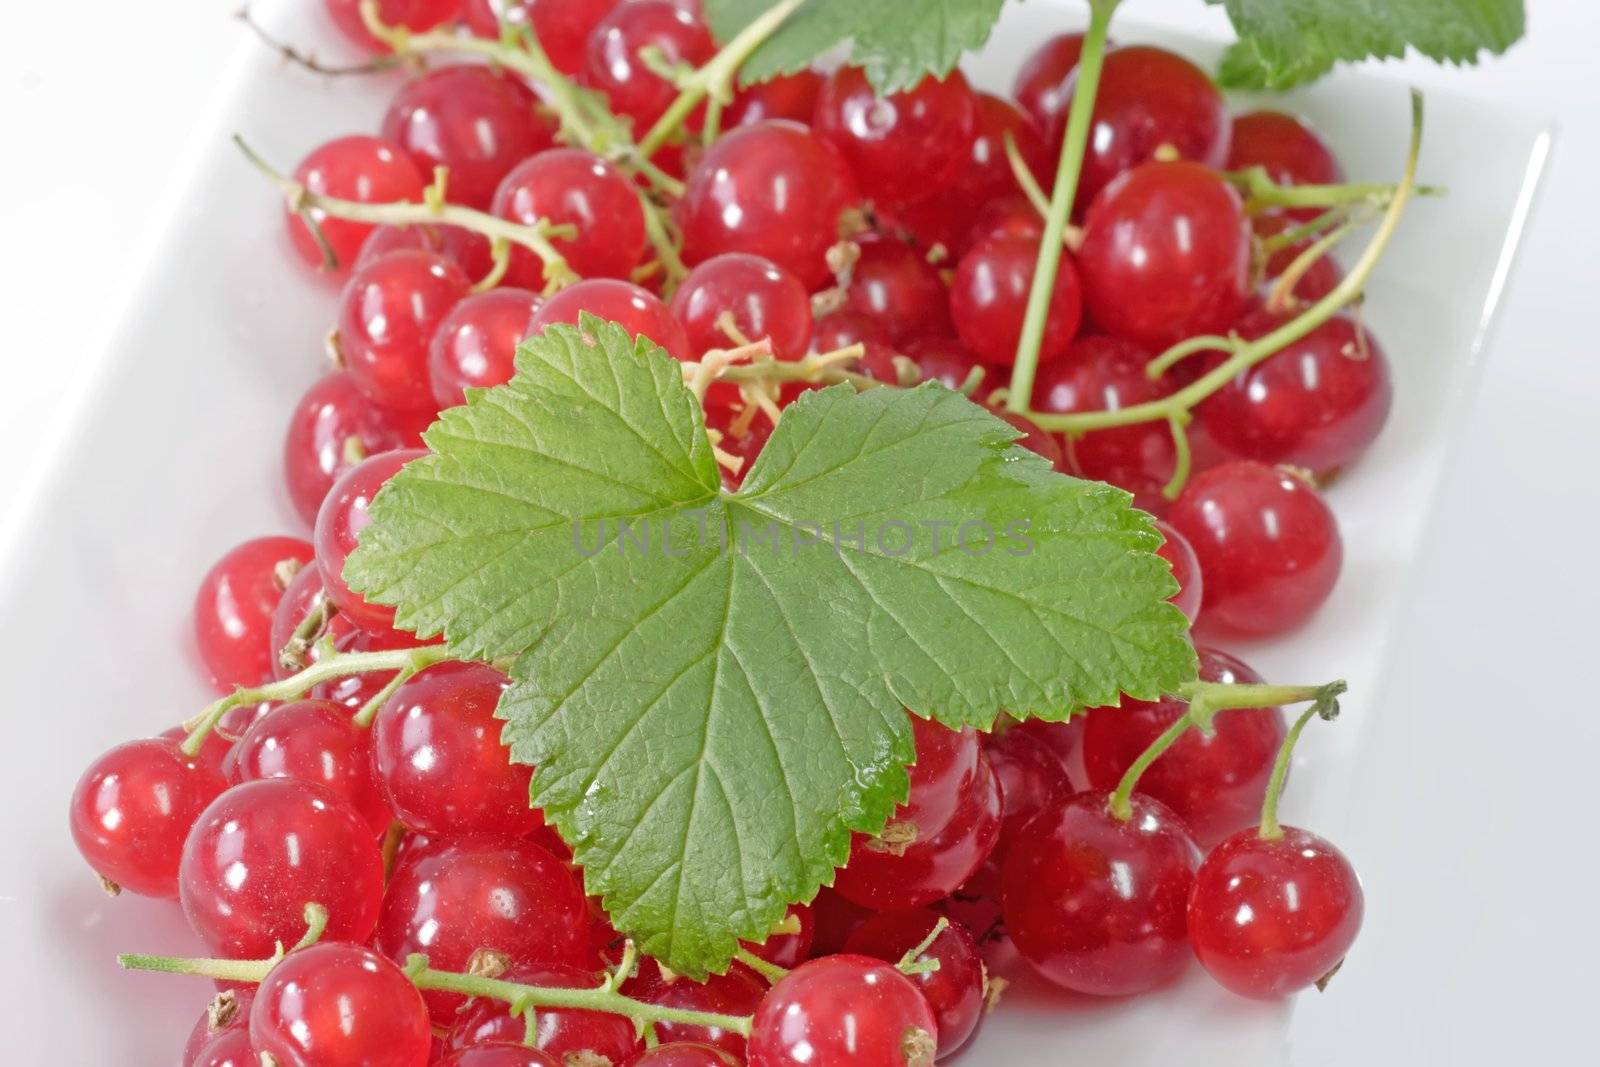 Red Currants on a Plate by Teamarbeit